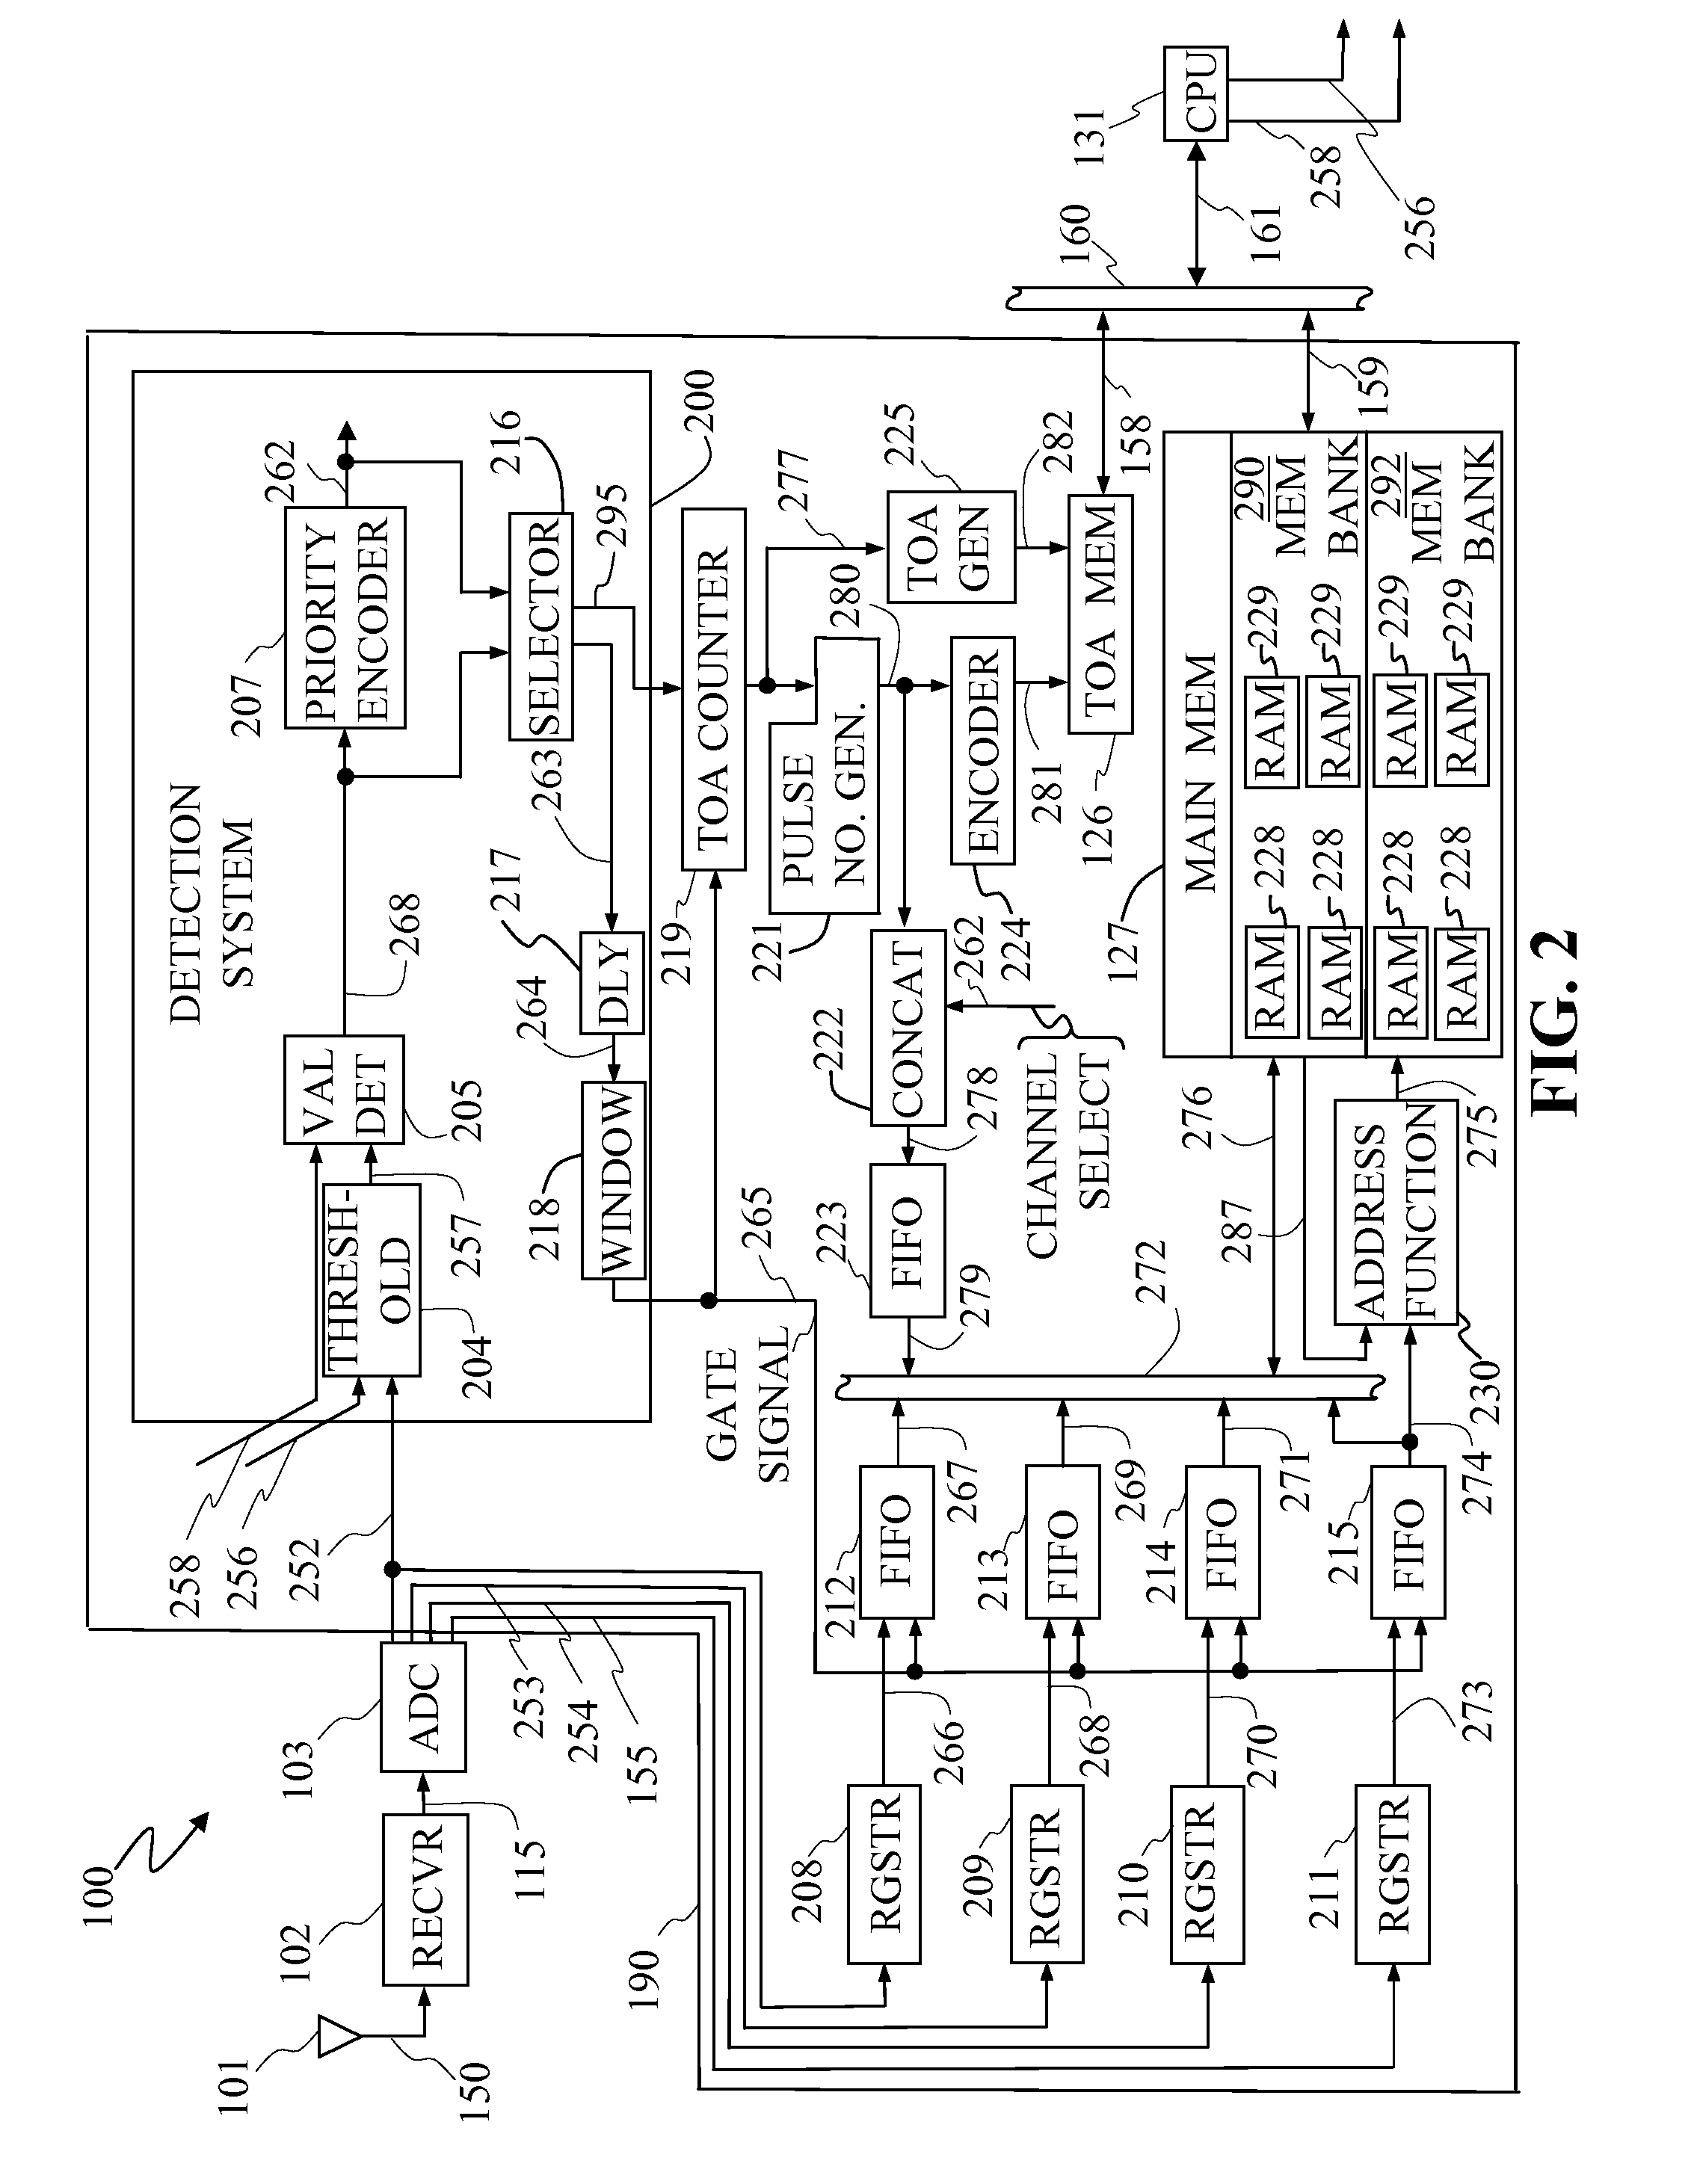 Pulse sorting apparatus for frequency histogramming in a radar receiver system